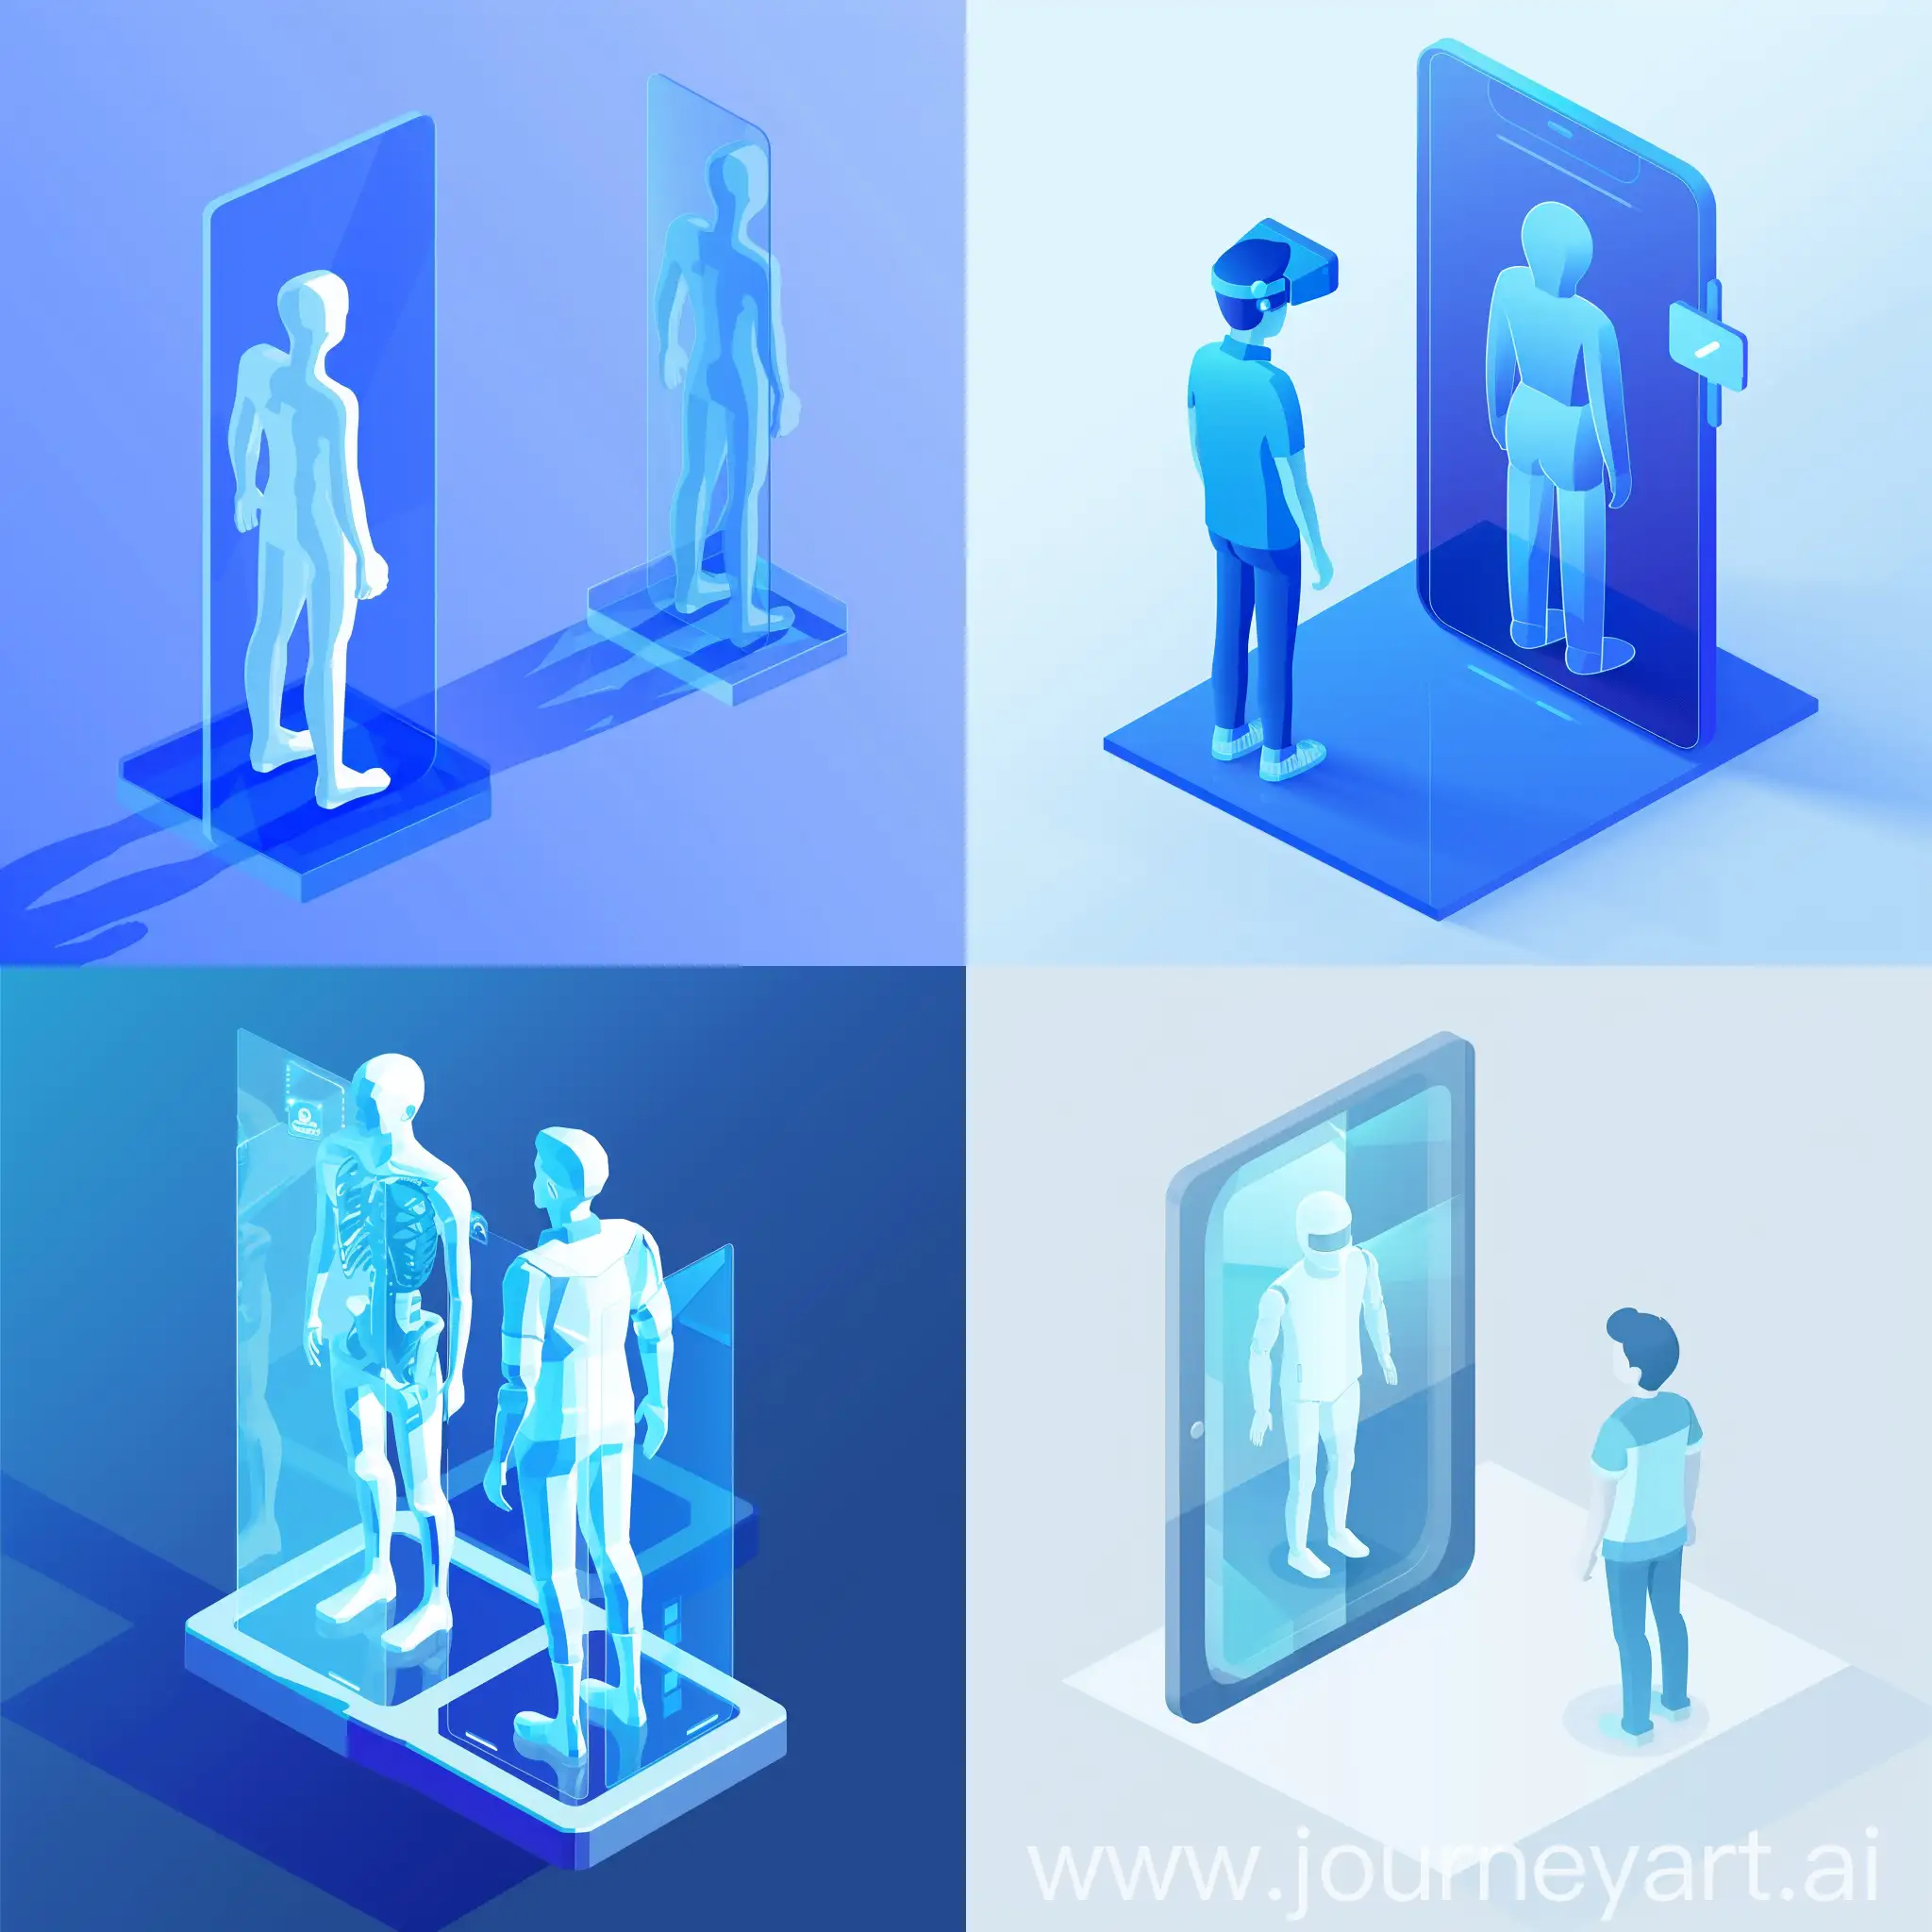 symbolizing a human and a digital avatar, in 3D glassmorphism style, isometric in shades of blue